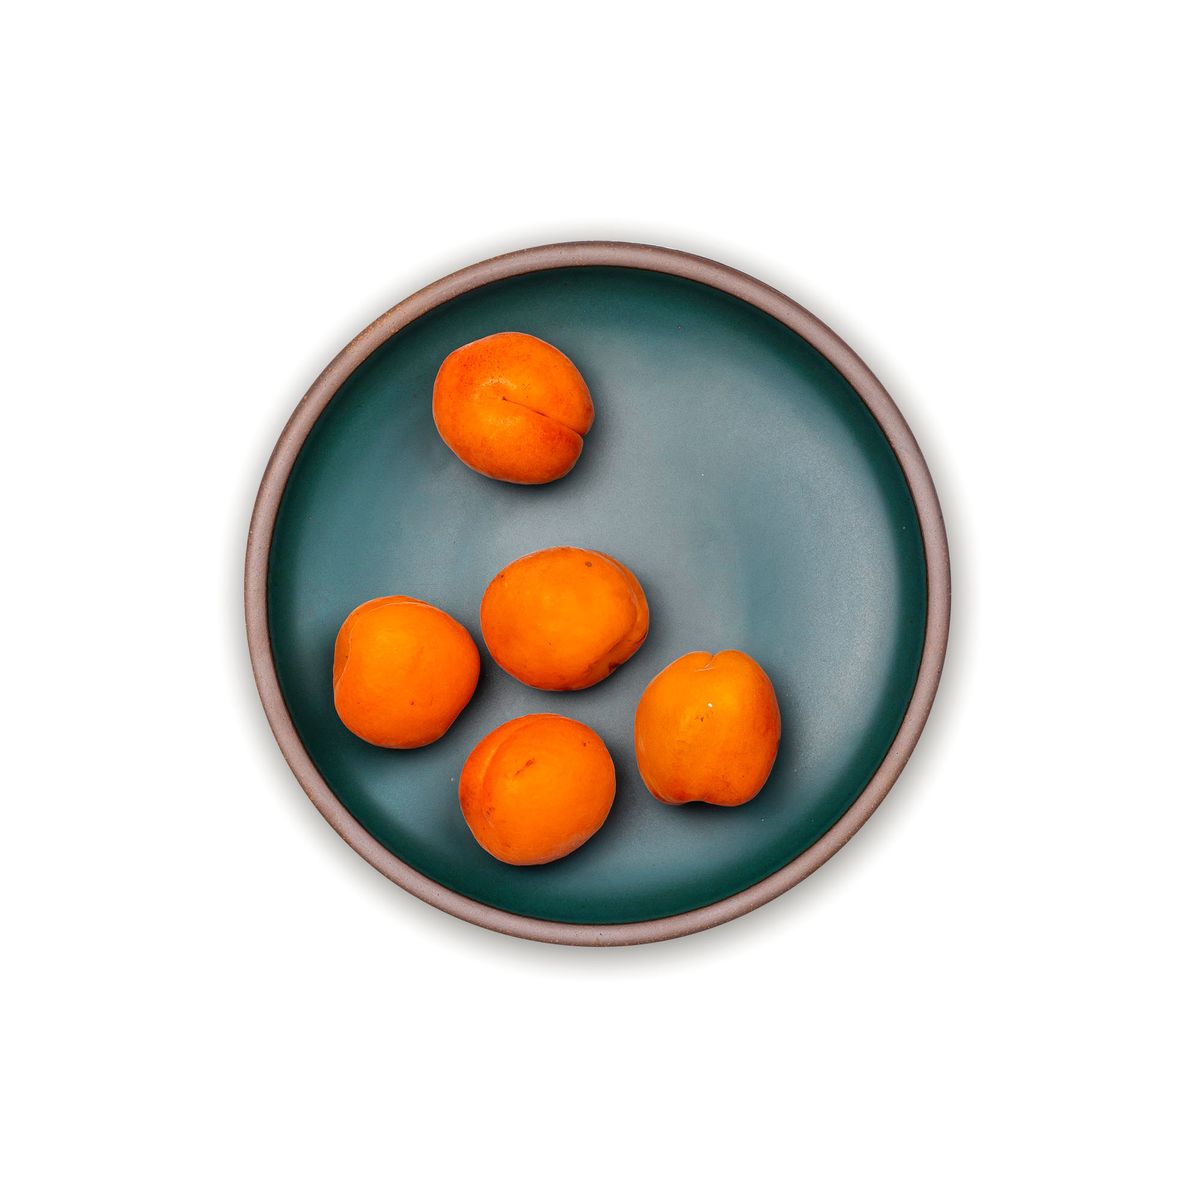 Whole clementines on a dinner sized ceramic plate in a deep dark teal color featuring iron speckles and an unglazed rim